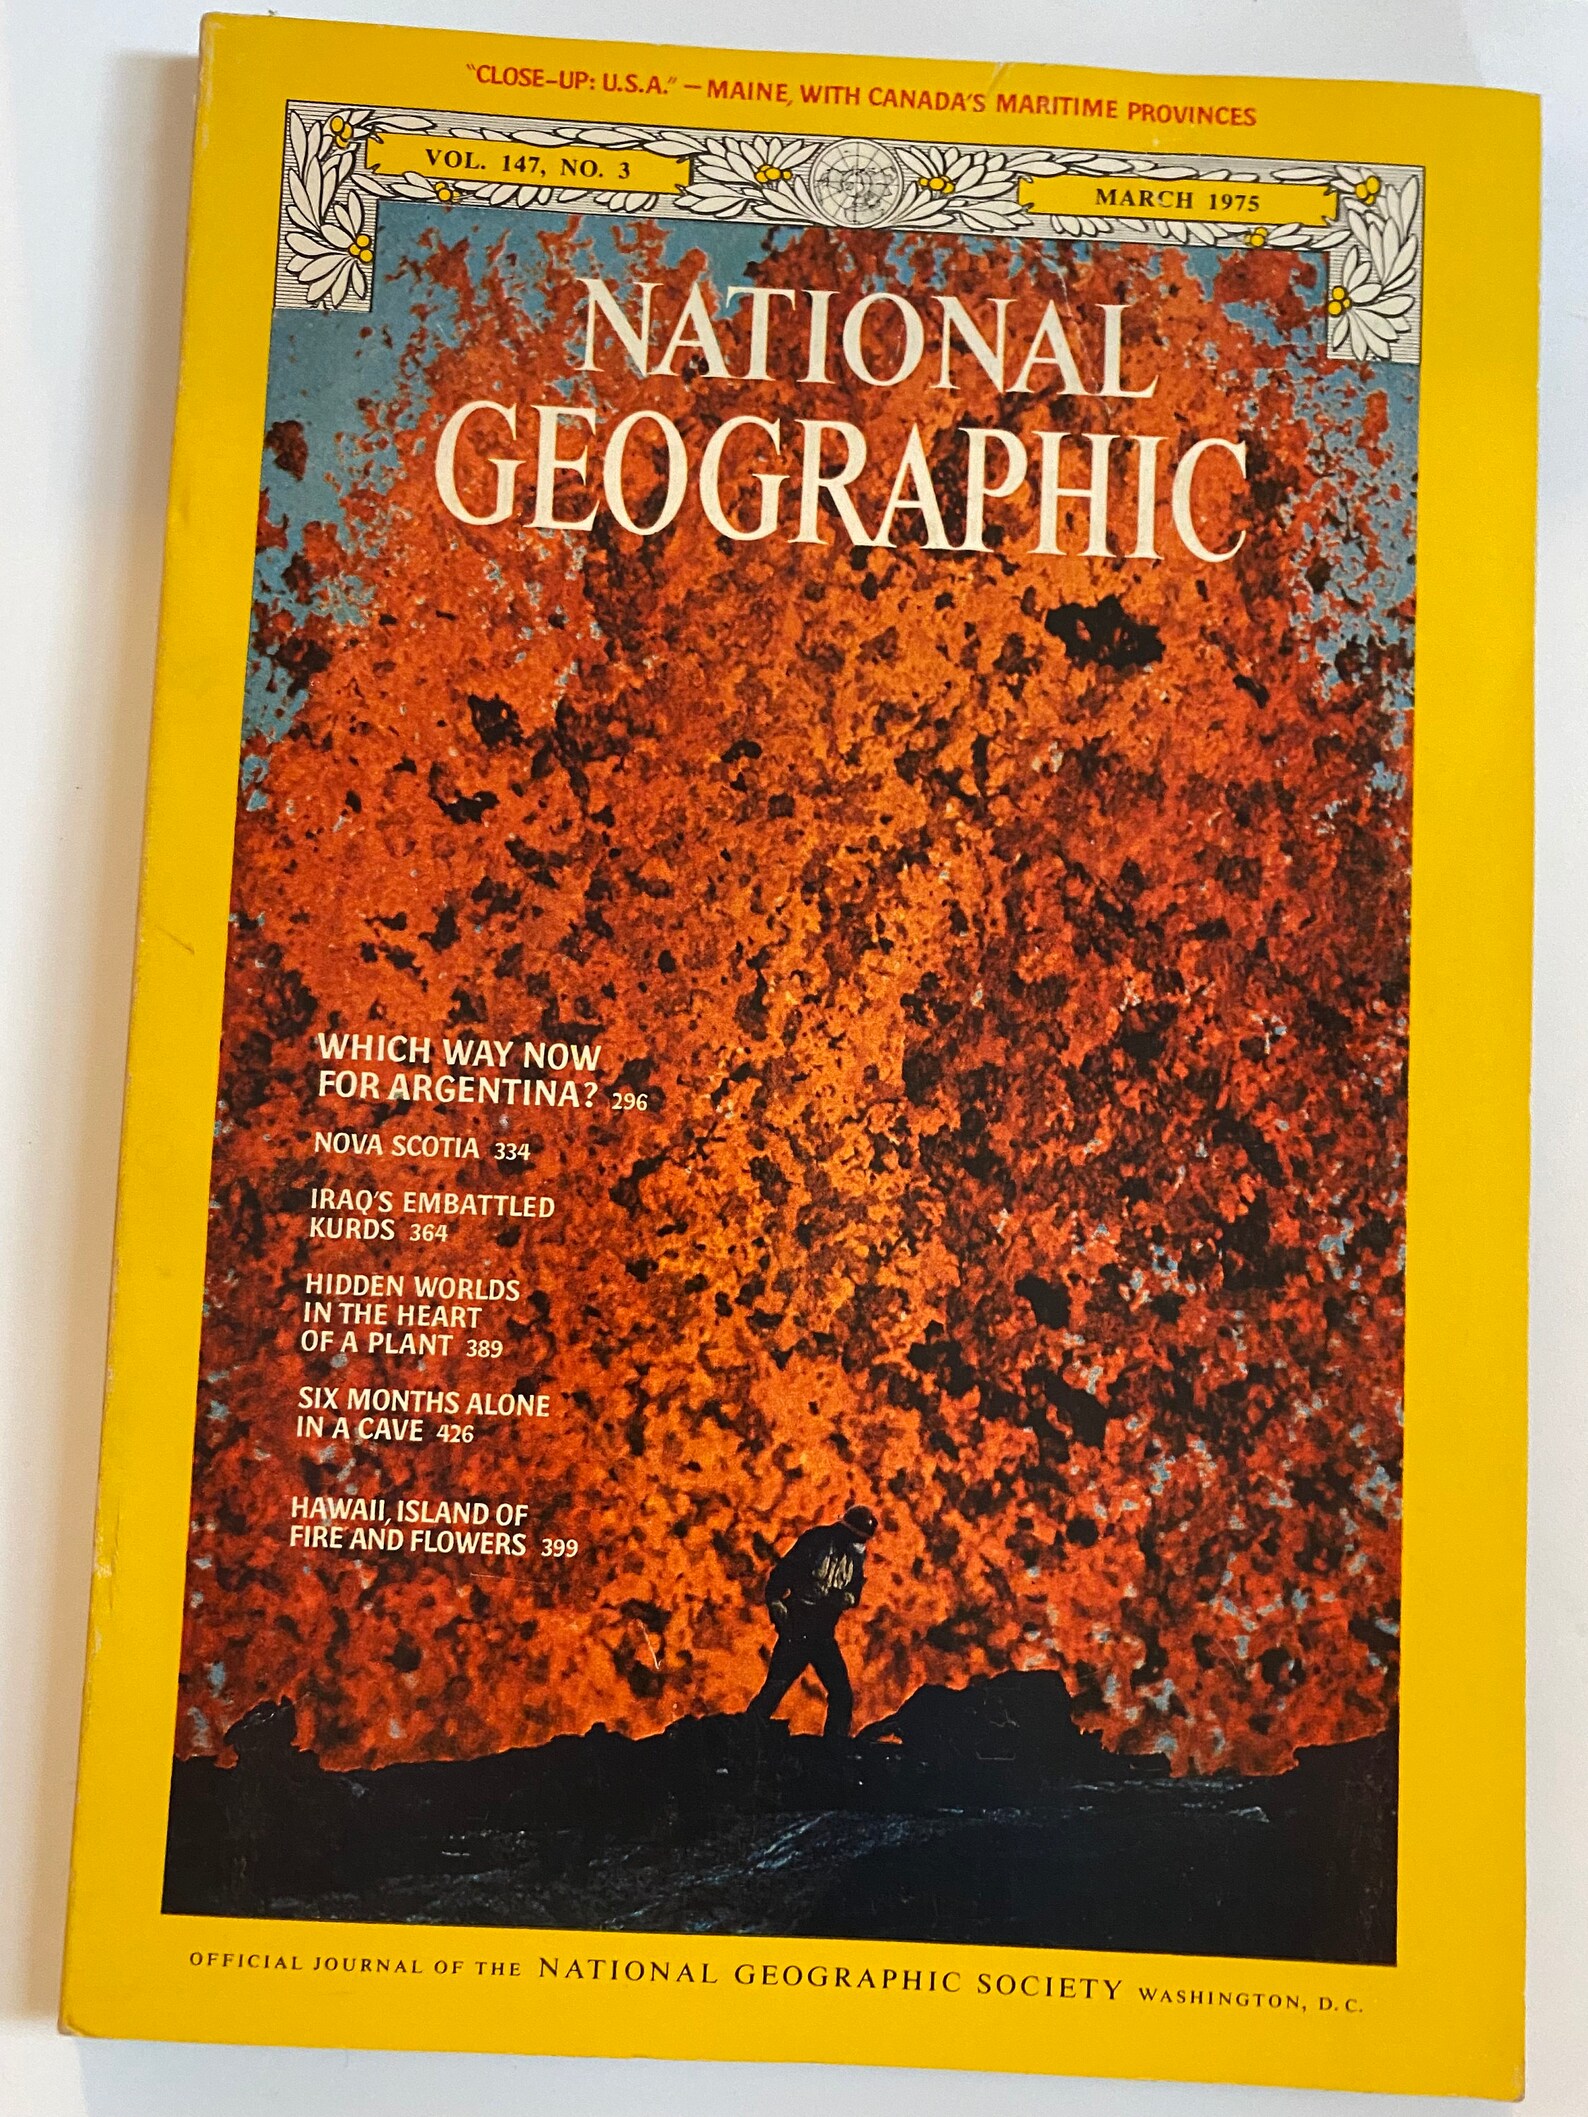 Vintage National Geographic Magazines The 1950s-1990s Bundle | Etsy